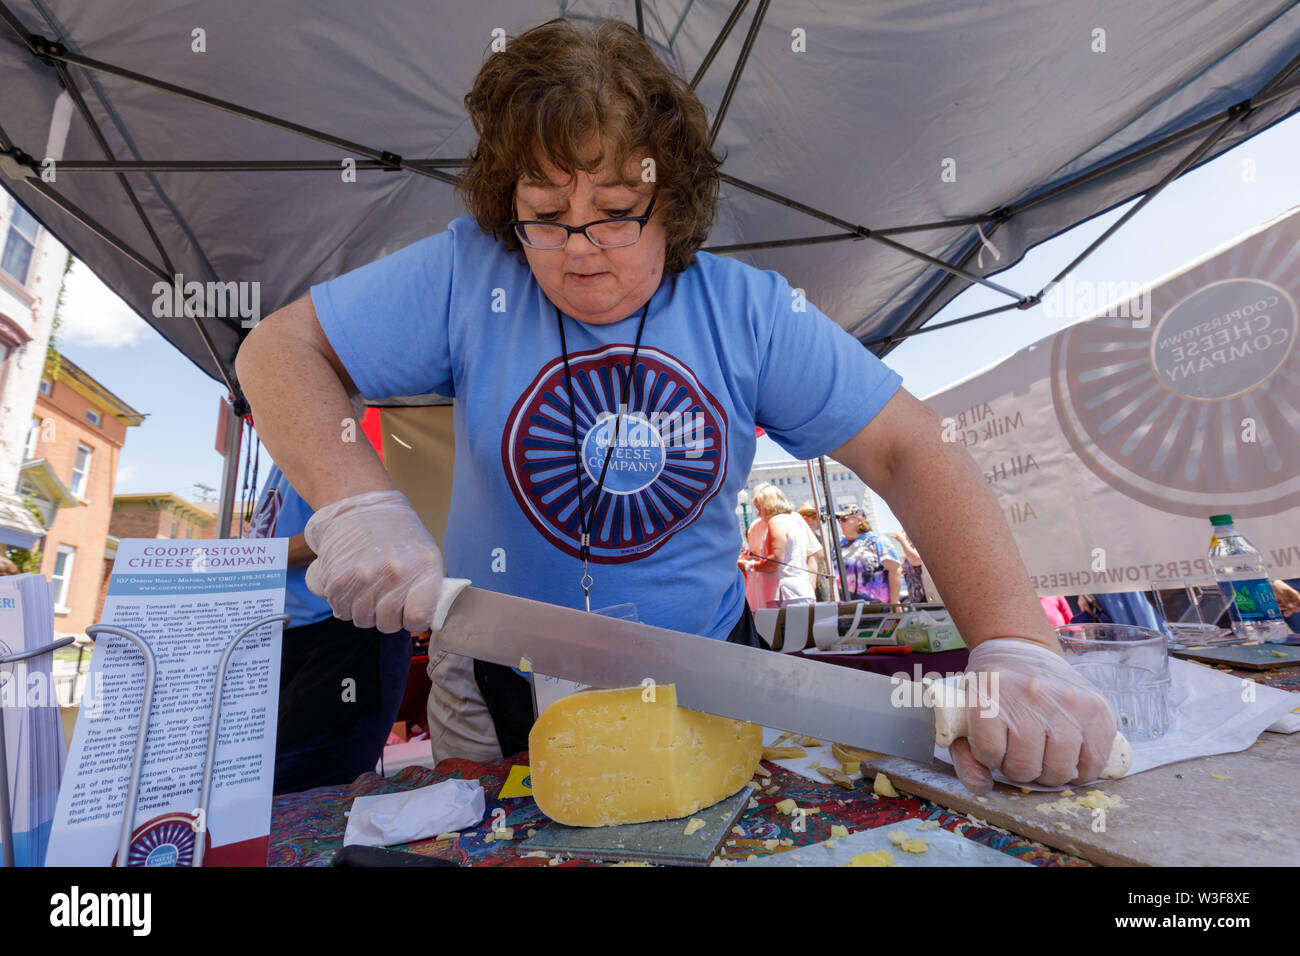 Woman cuts artisan cheese at the annual Little Falls Cheese Festival in Herkimer County, New York, USA Stock Photo